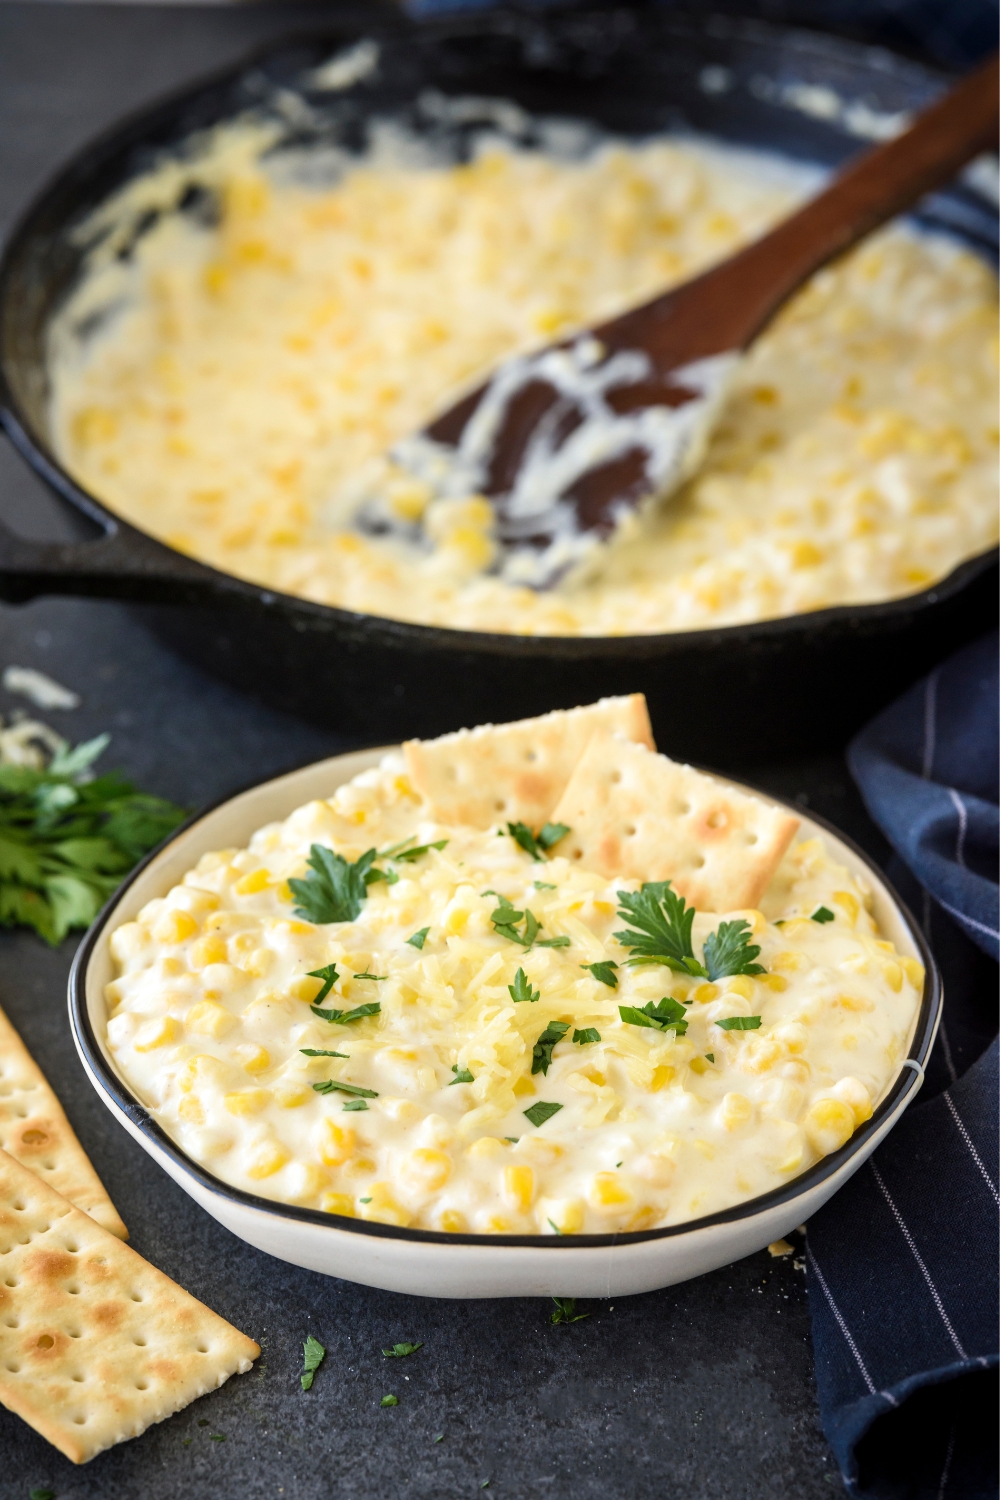 Cream cheese corn in a bowl, garnished with two crackers and some fresh parsley. Behind is a skillet filled with more cream cheese corn and a wooden spatula.